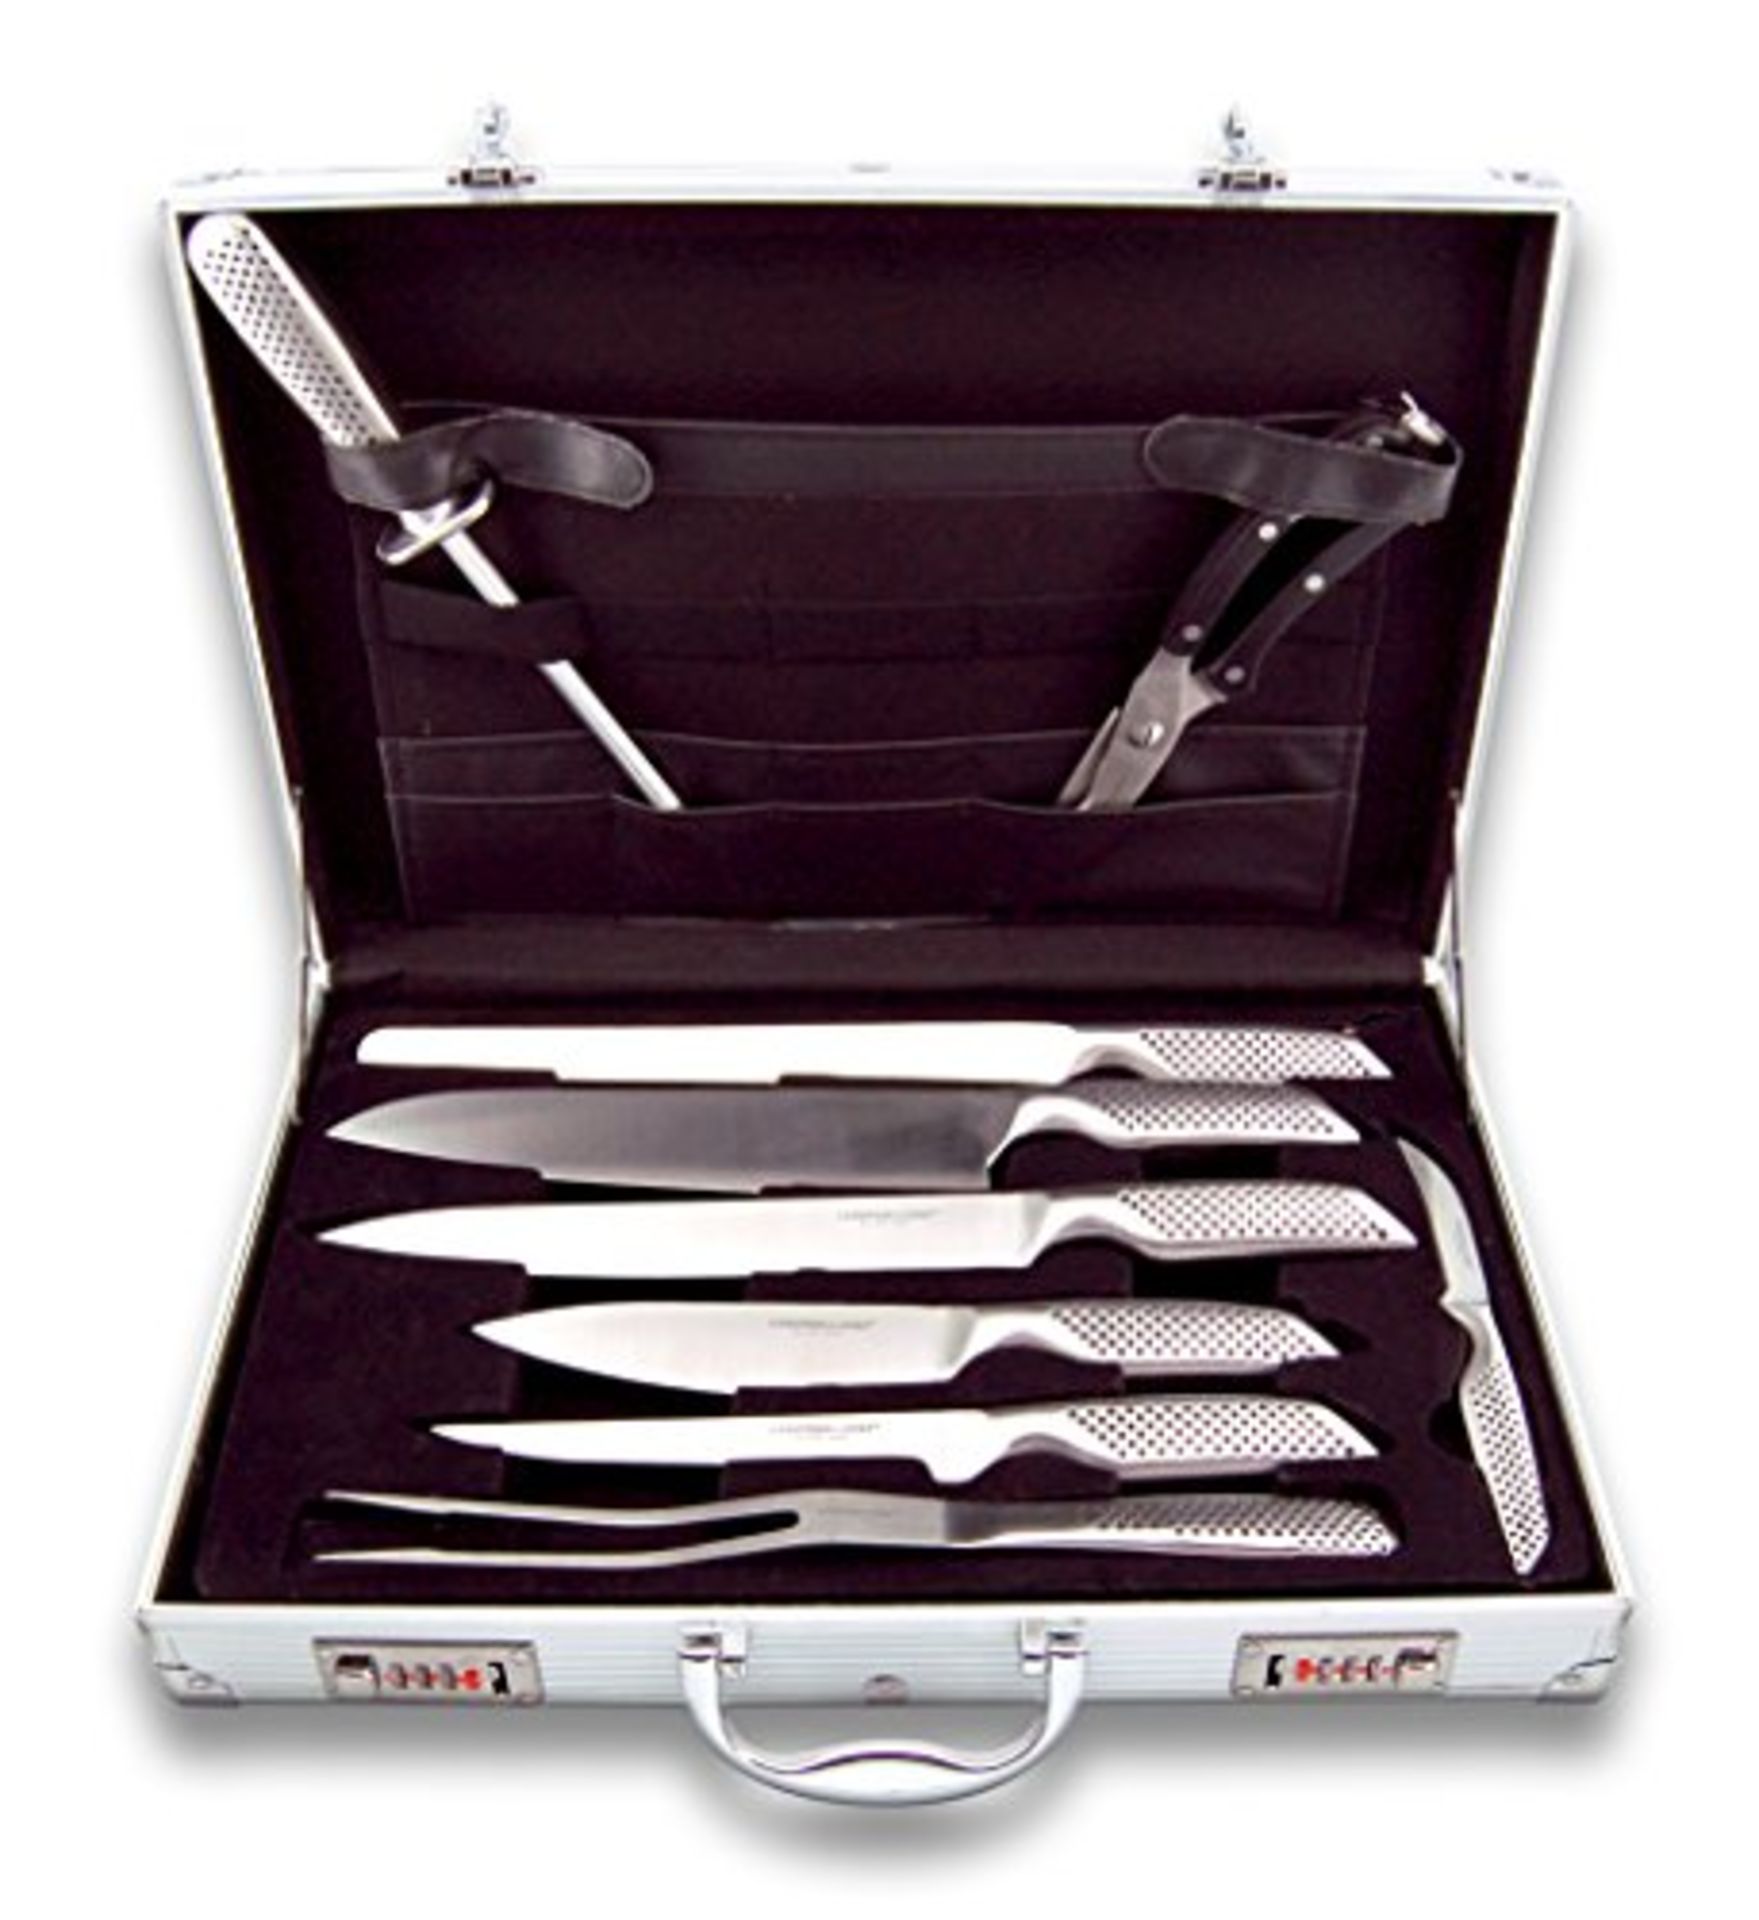 V Brand New Nine Piece Chefs Knife Set In Aluminium Case With Combination Locks Le Couteau Du Chef